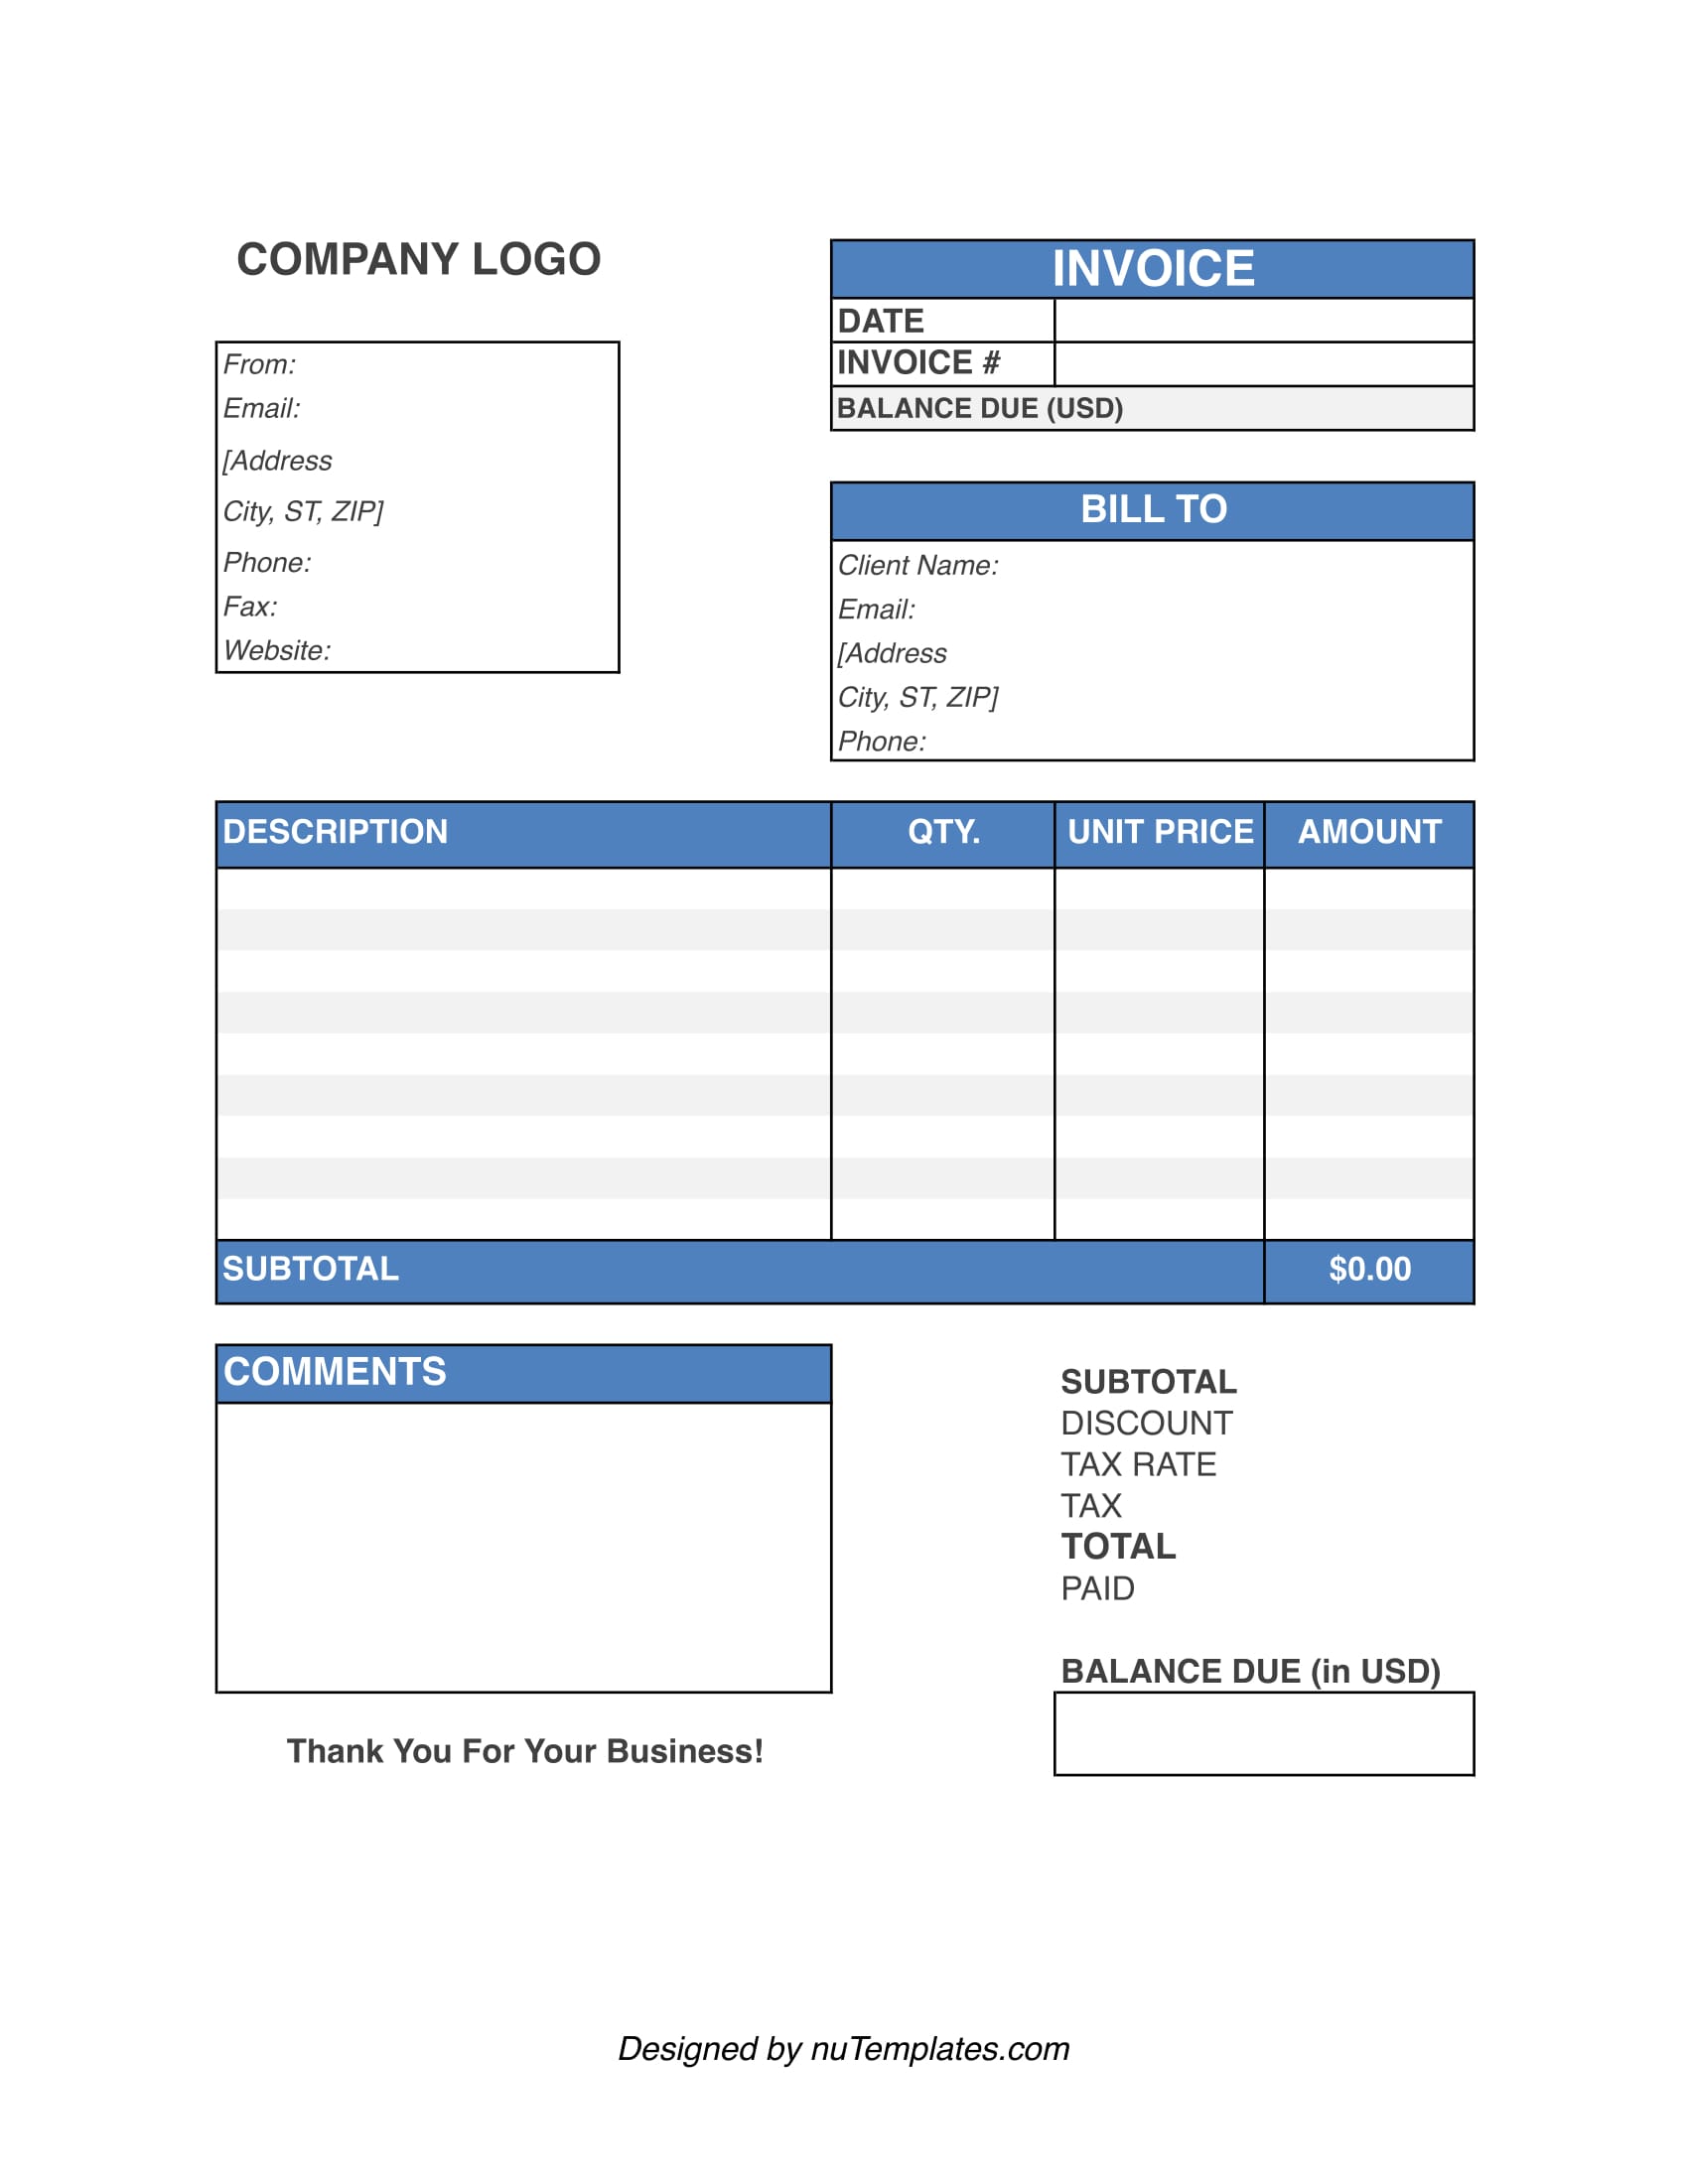 free-cleaning-housekeeping-invoice-template-word-pdf-eforms-riset